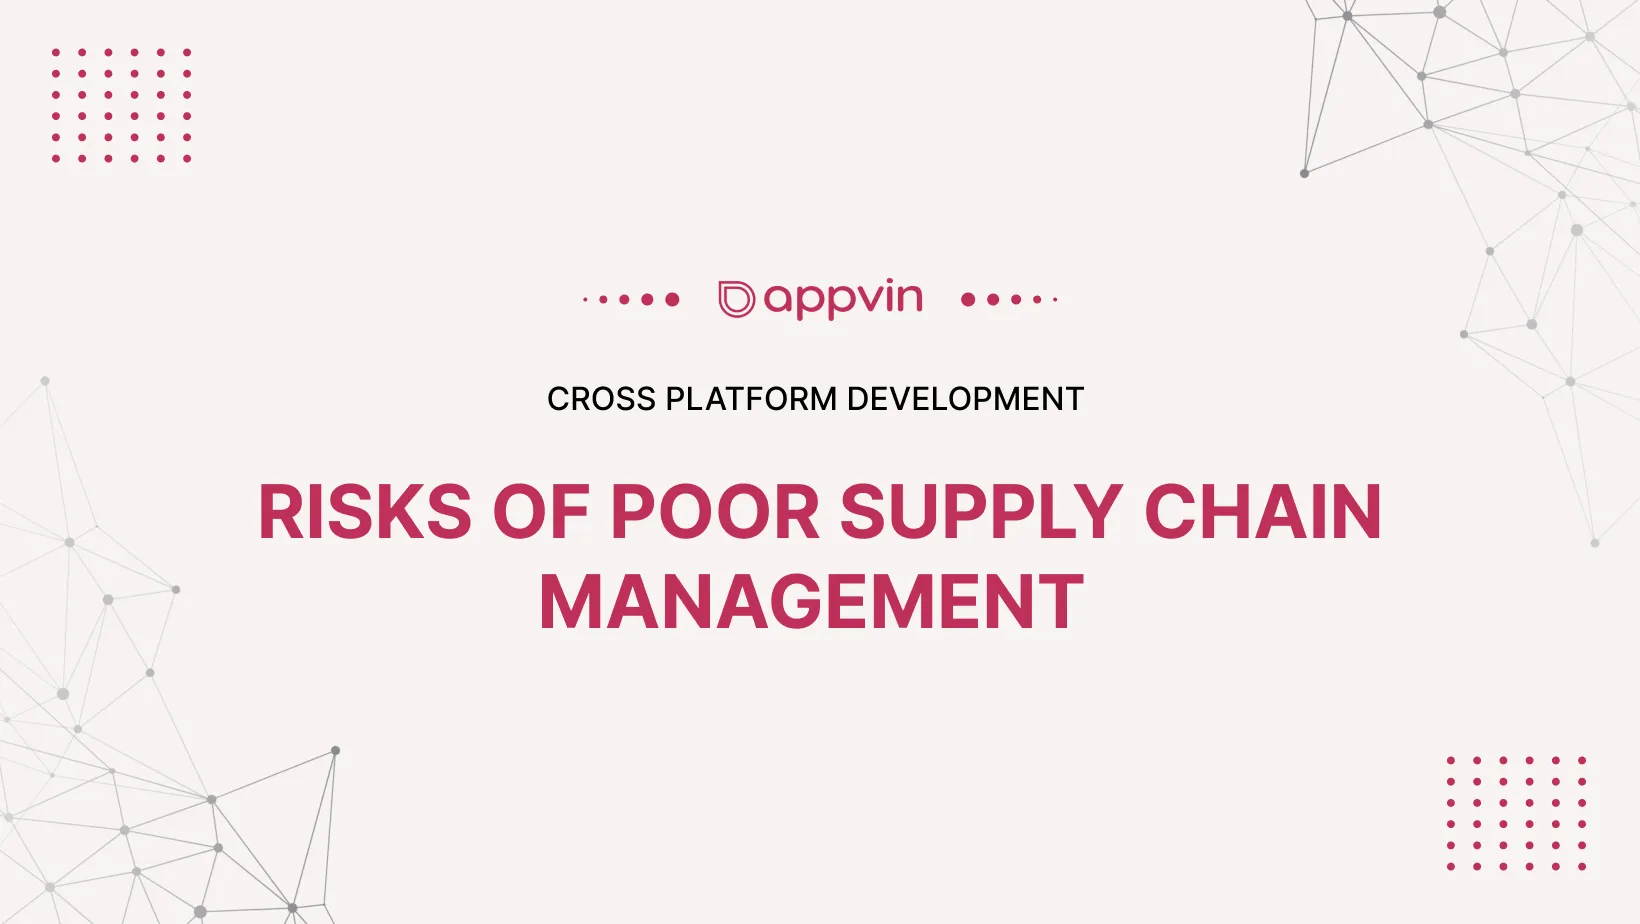 Risks of poor supply chain management